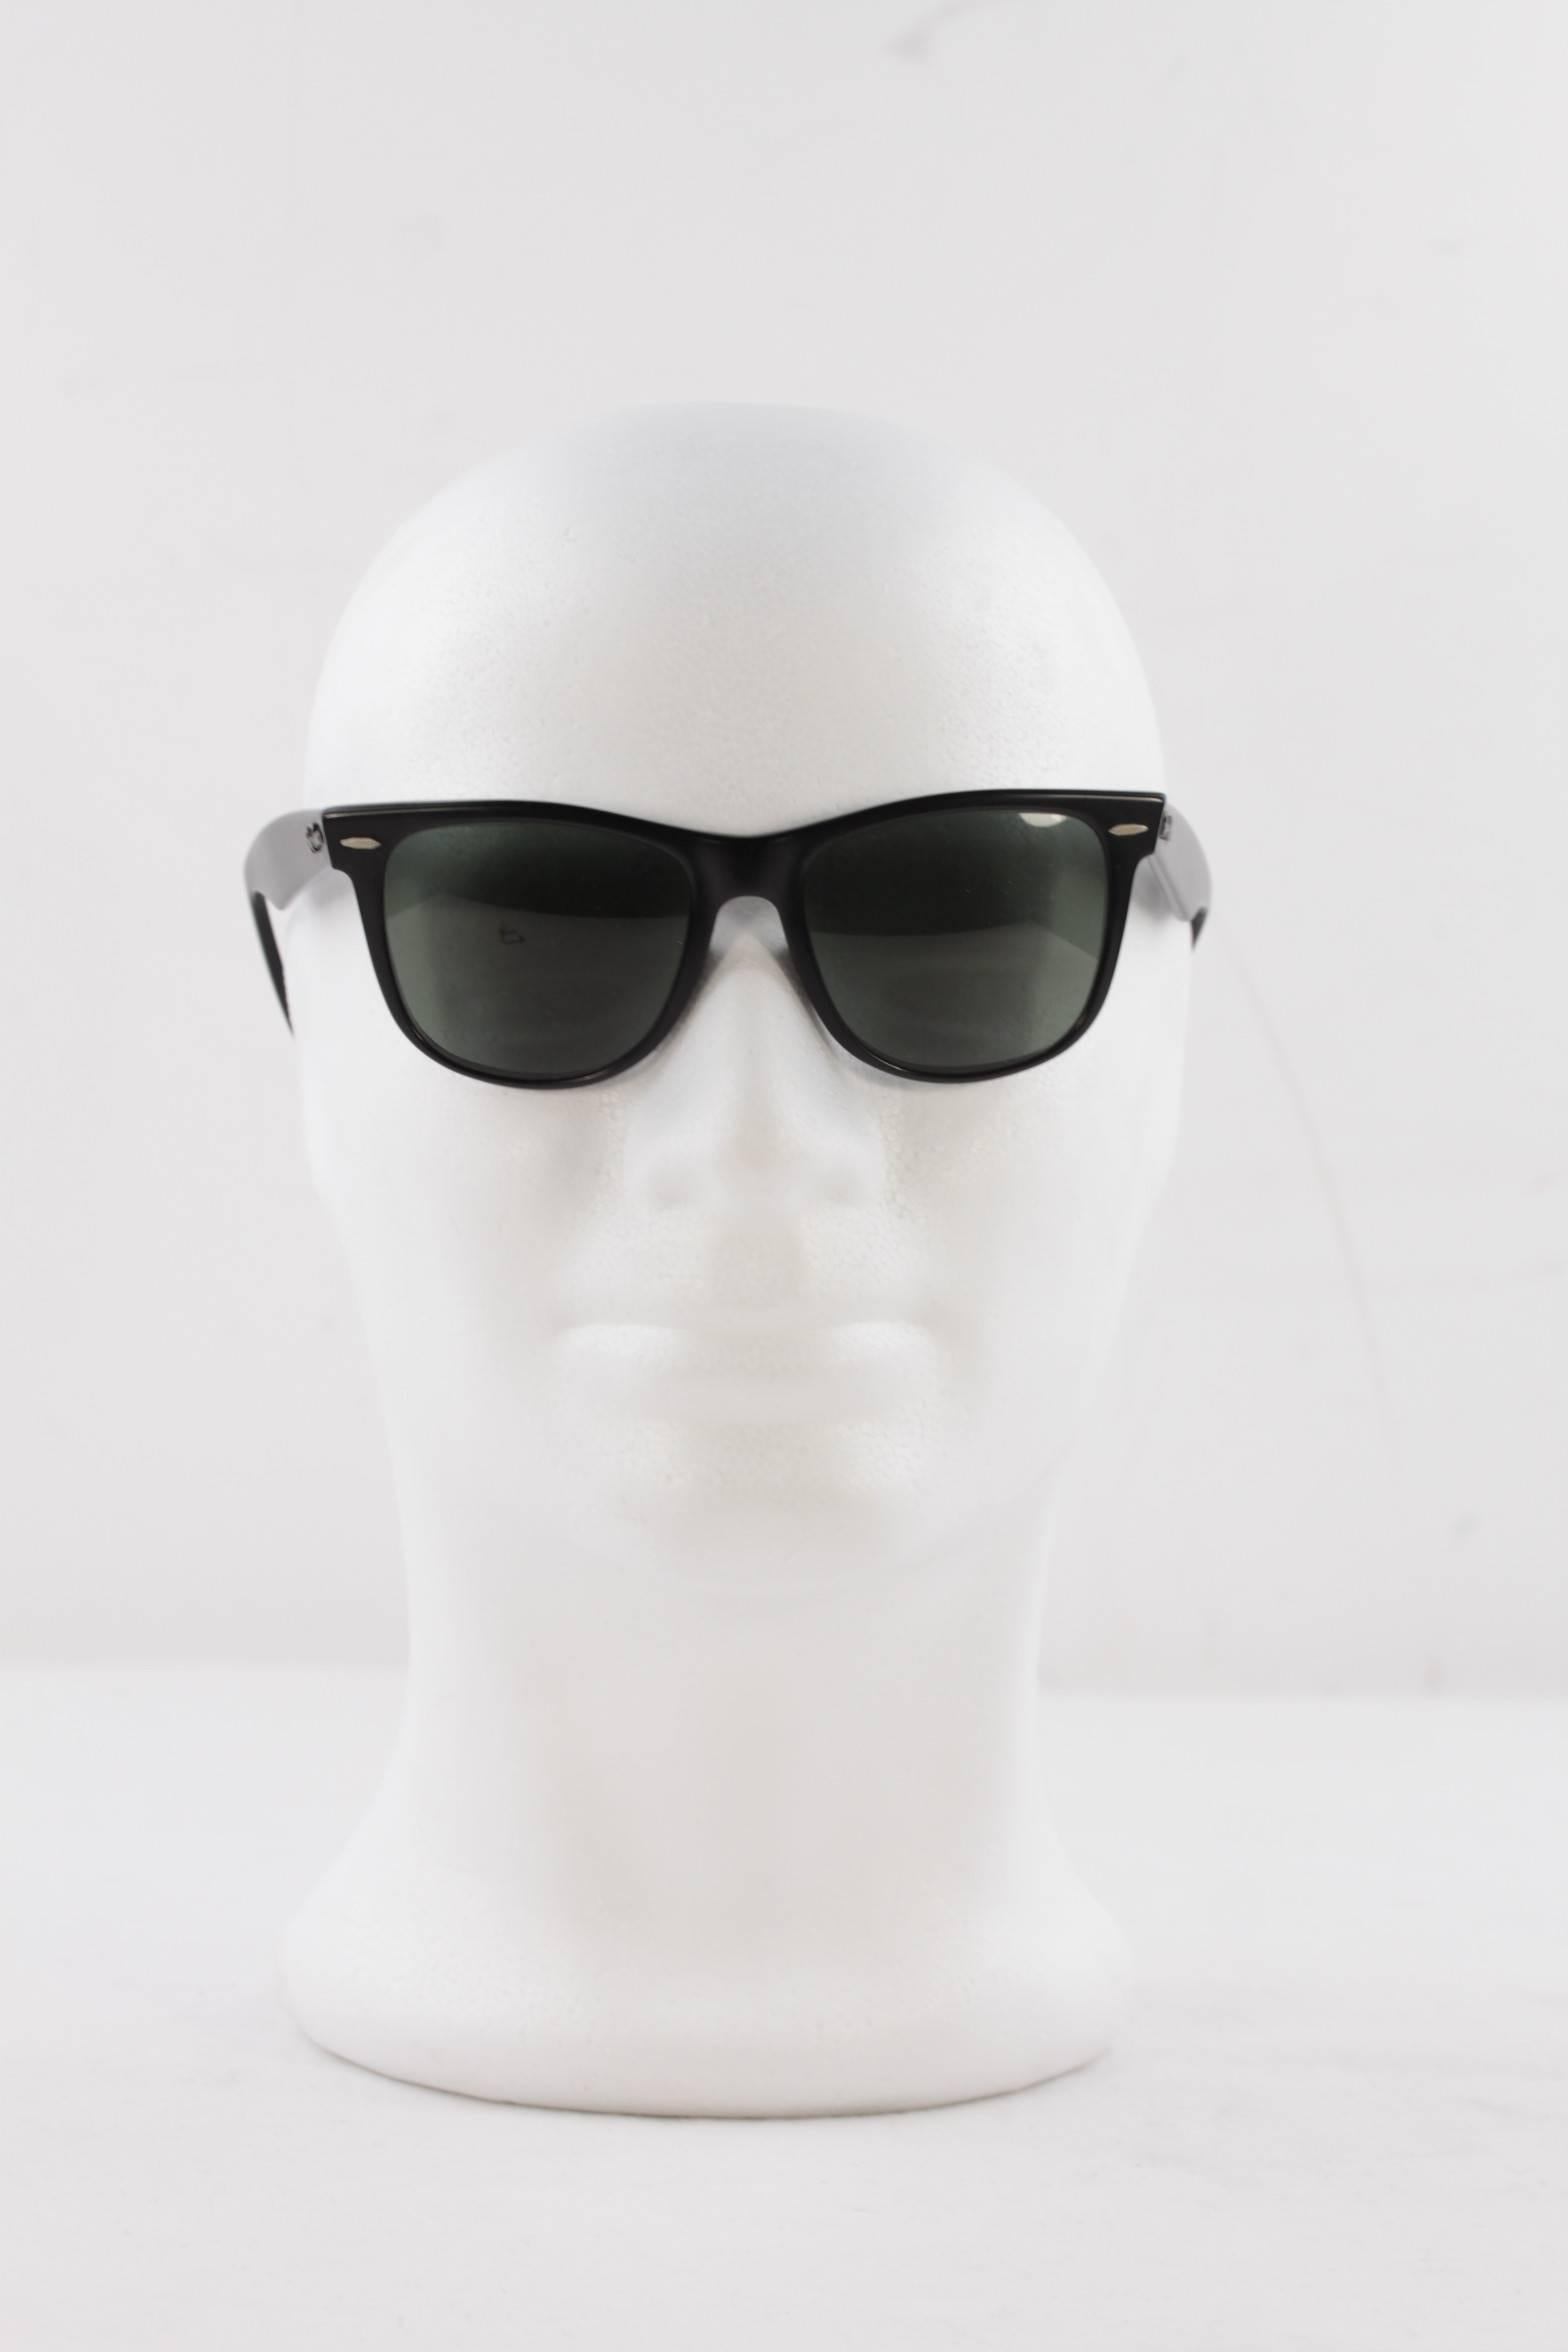  - Legendary vintage sunglasses by Ray-Ban Bausch & Lomb, mod.WAYFARER II

- Matte Black plastic frame

- Ray-Ban logo in raised metal relief on the exterior of both ear stems

- Original BAUSCH & LOMB green lenses (BL logos on each